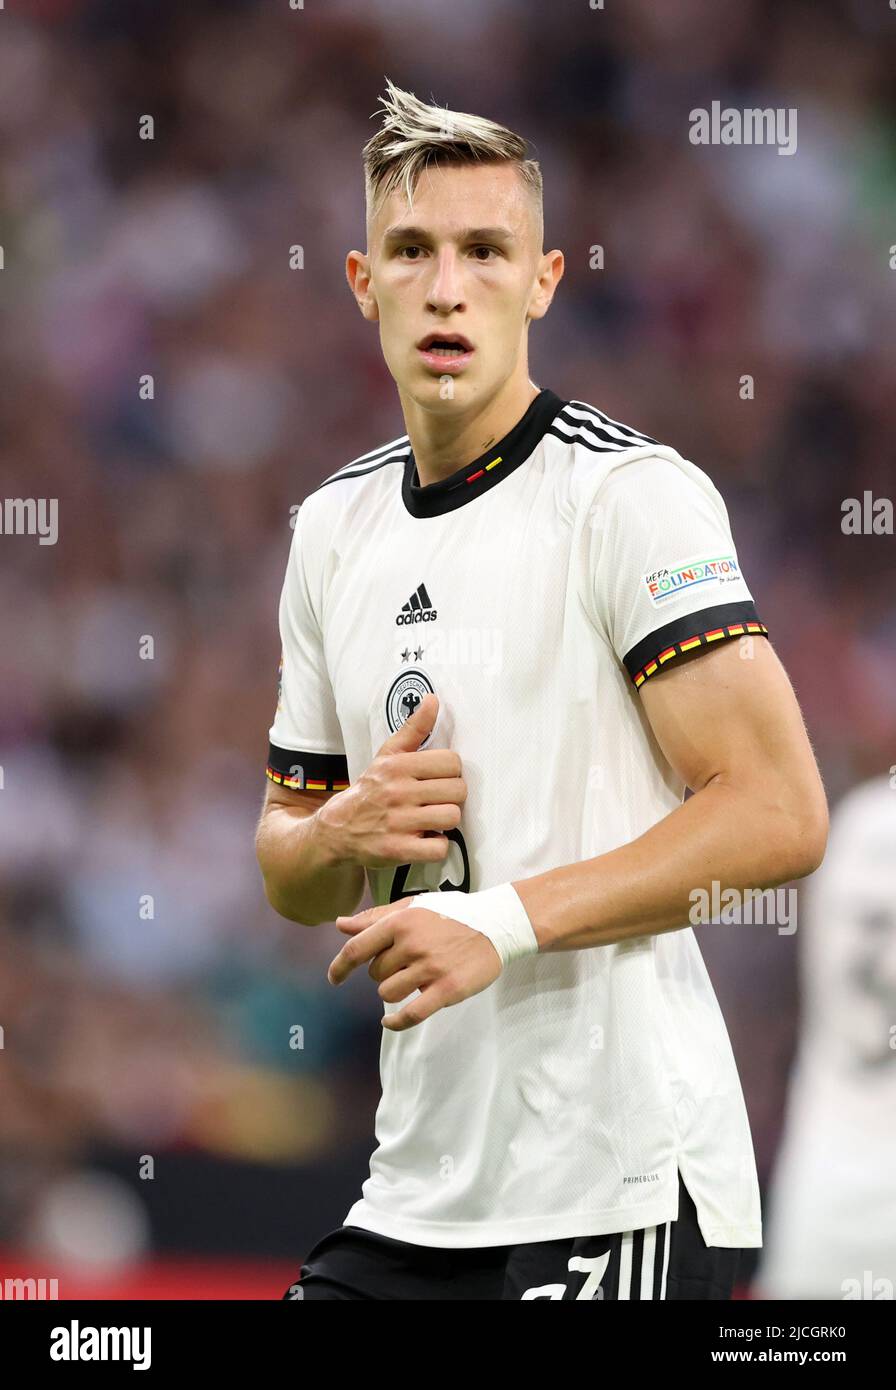 Nico Schlotterbeck of Germany MUNICH, GERMANY - JUNE 07:  UEFA Nations League League A Group 3 match between Germany and England at Allianz Arena on June 07, 2022 in Munich, Germany. Nations League Deutschland England  © diebilderwelt / Alamy Stock Stock Photo